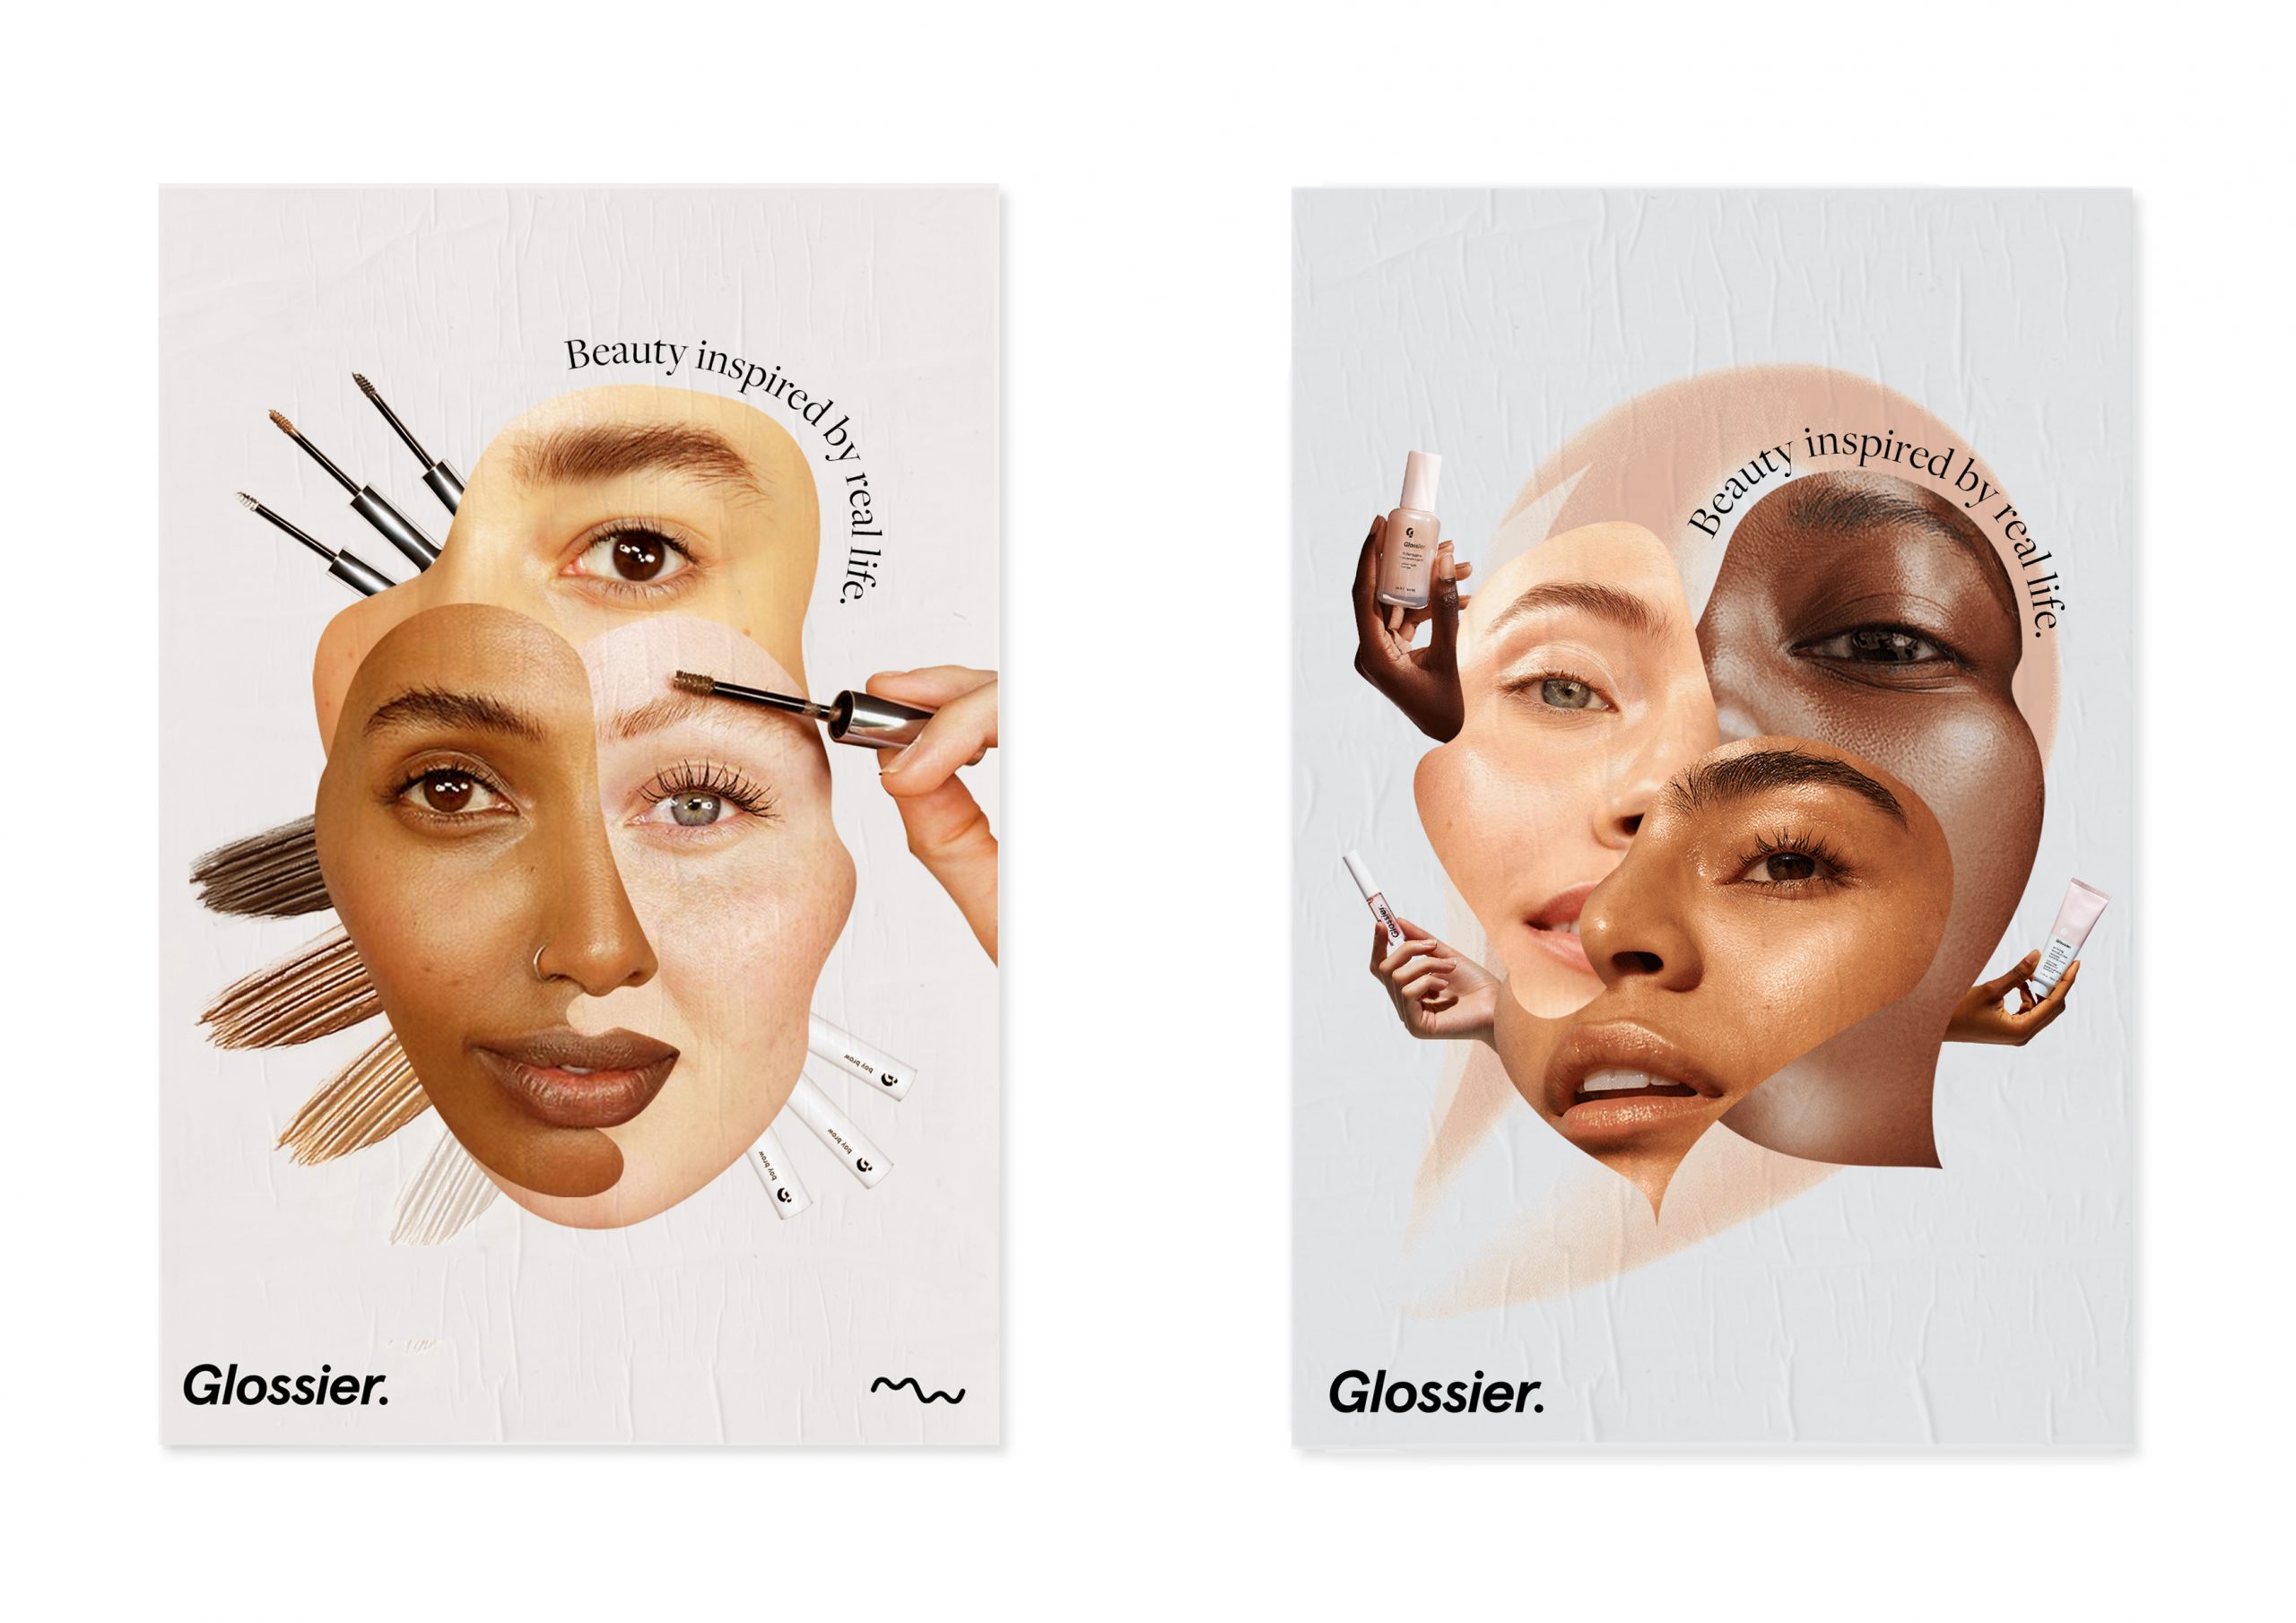 Glossier collage posters for possible campaign